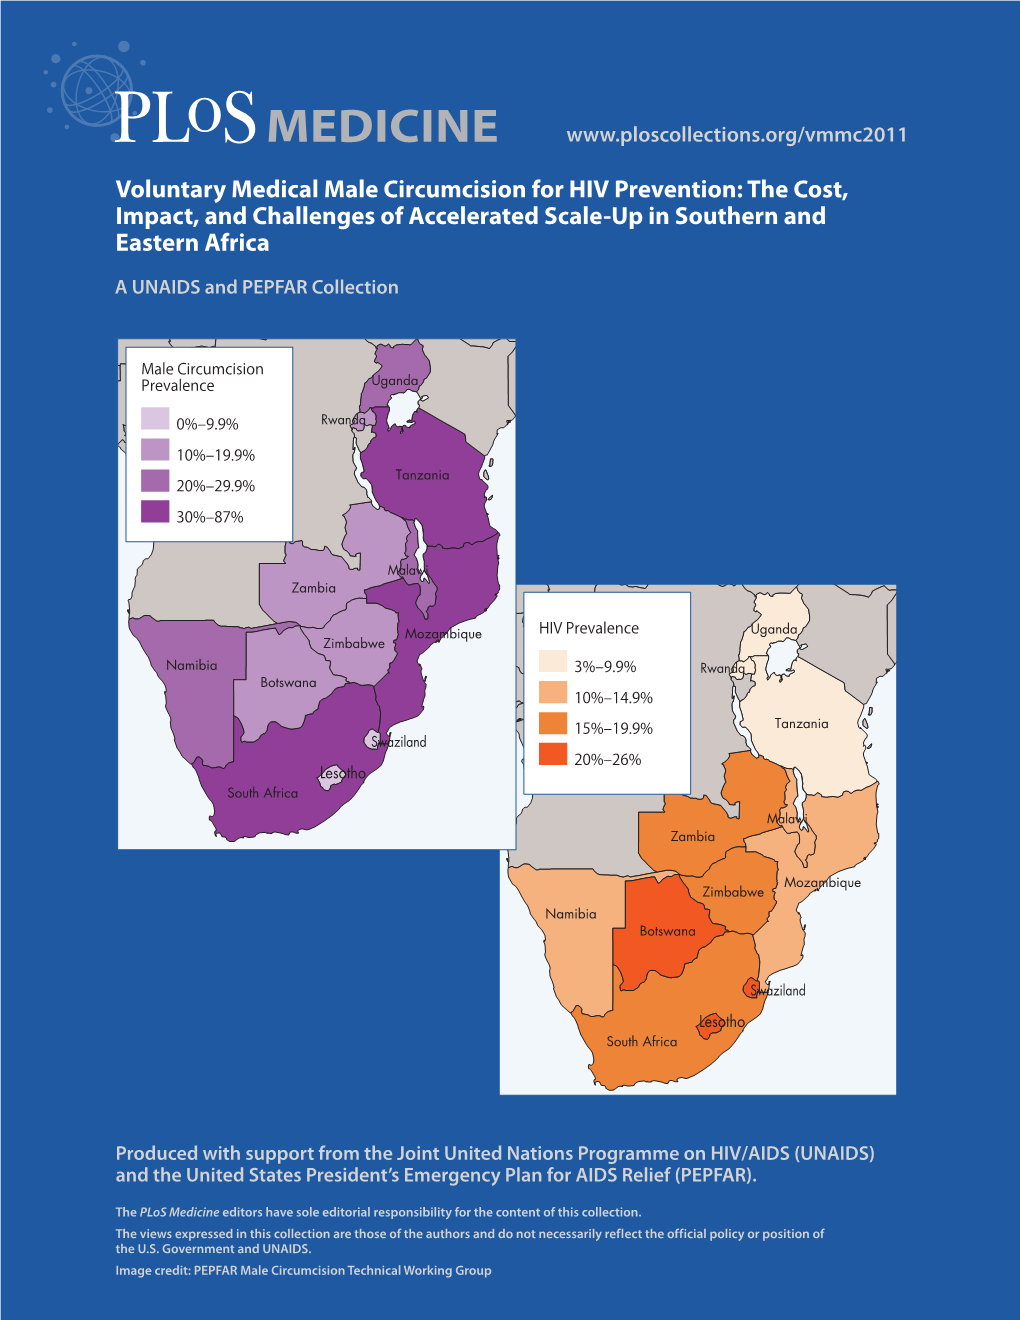 Voluntary Medical Male Circumcision for HIV Prevention the Cost, Impact, and Challenges of Accelerated Scale-Up in Southern and Eastern Africa